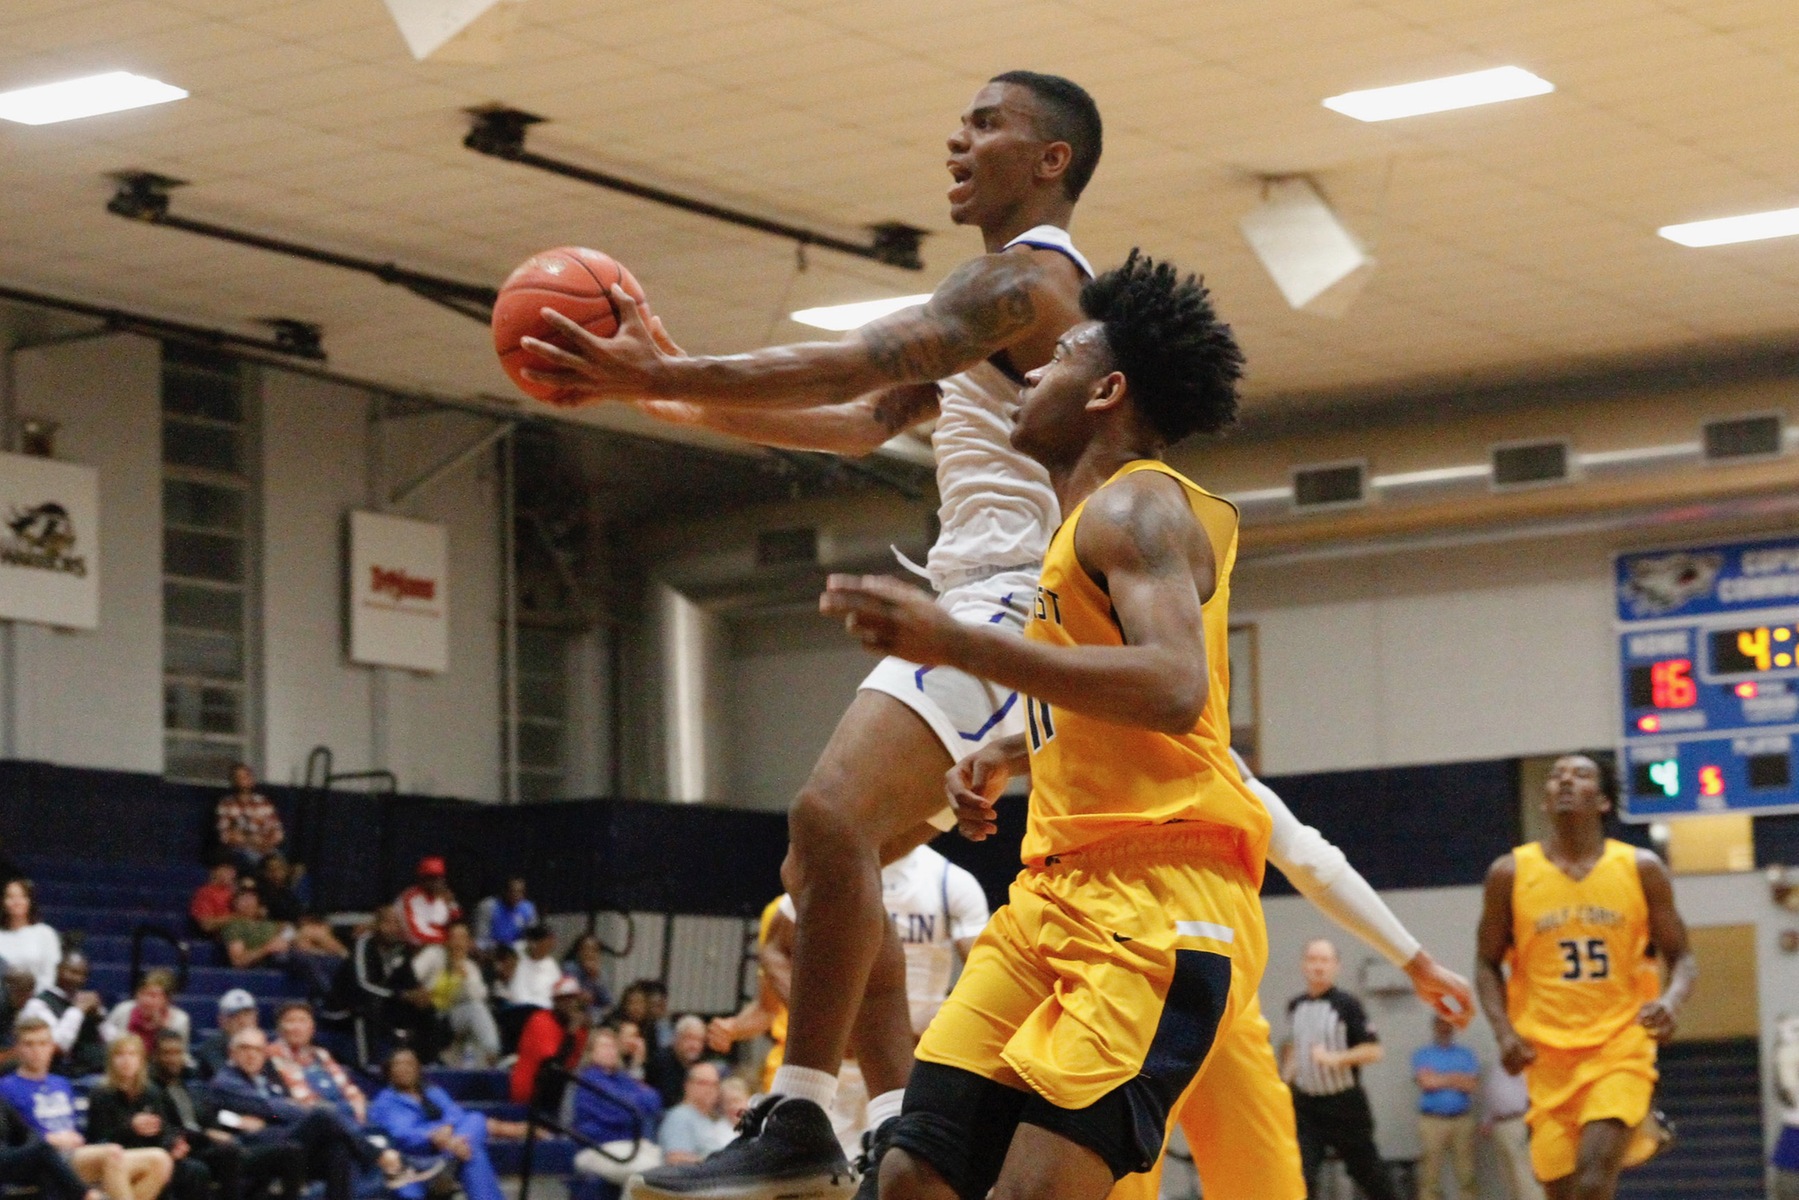 Wolves force overtime, but fall to Gulf Coast, 58-56